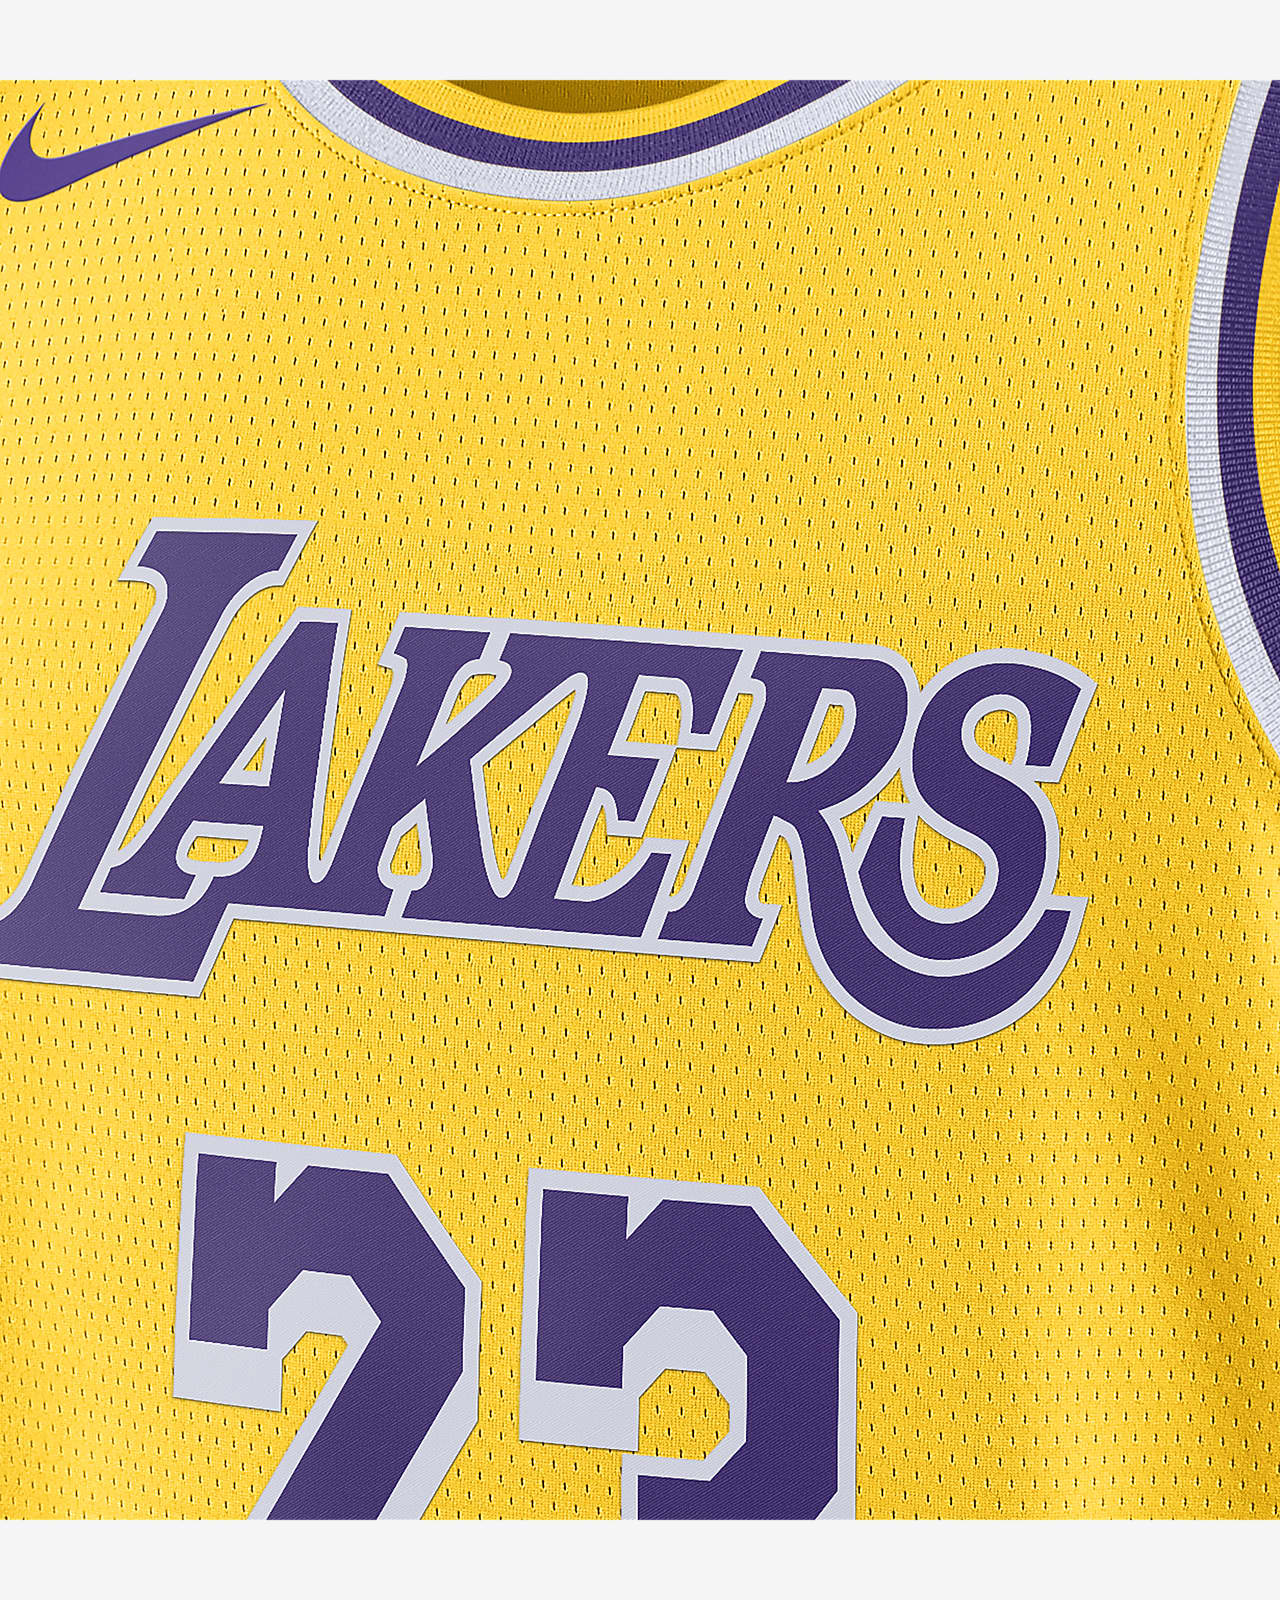 lakers jersey design yellow